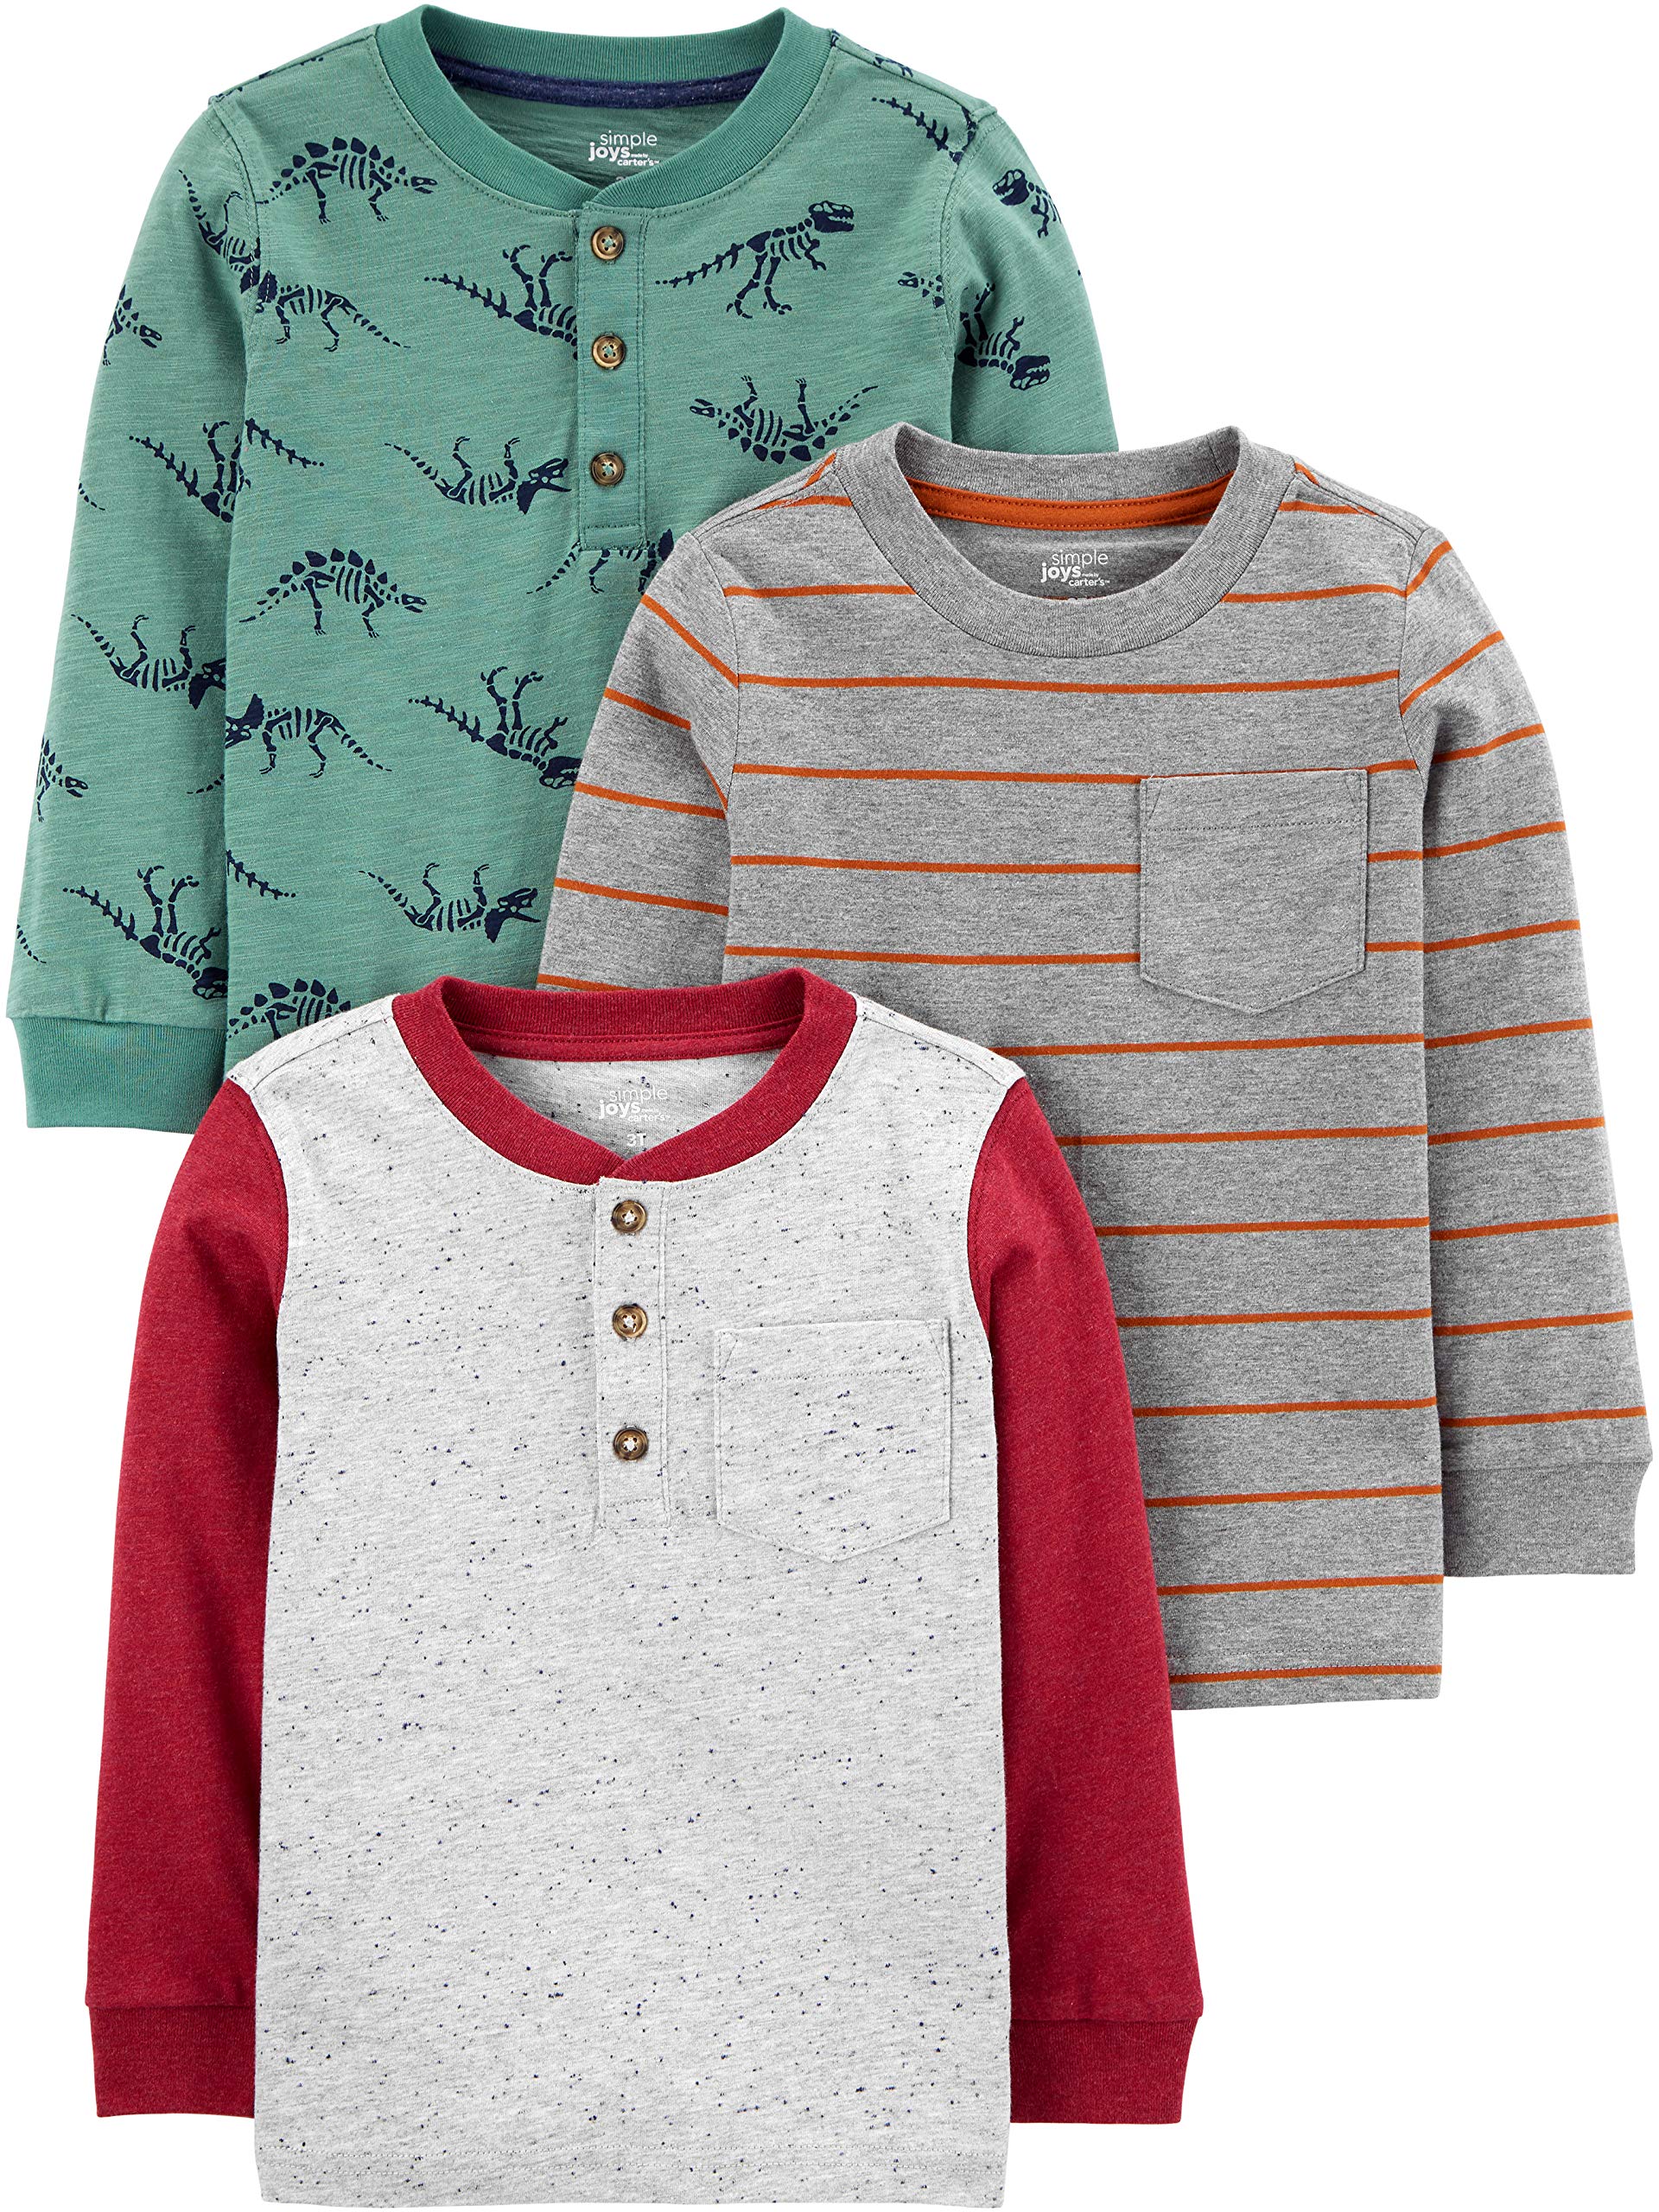 Simple Joys by Carter's Baby Boys' Long-Sleeve Shirts, Pack of 3, Dinosaur/Stripe, 18 Months